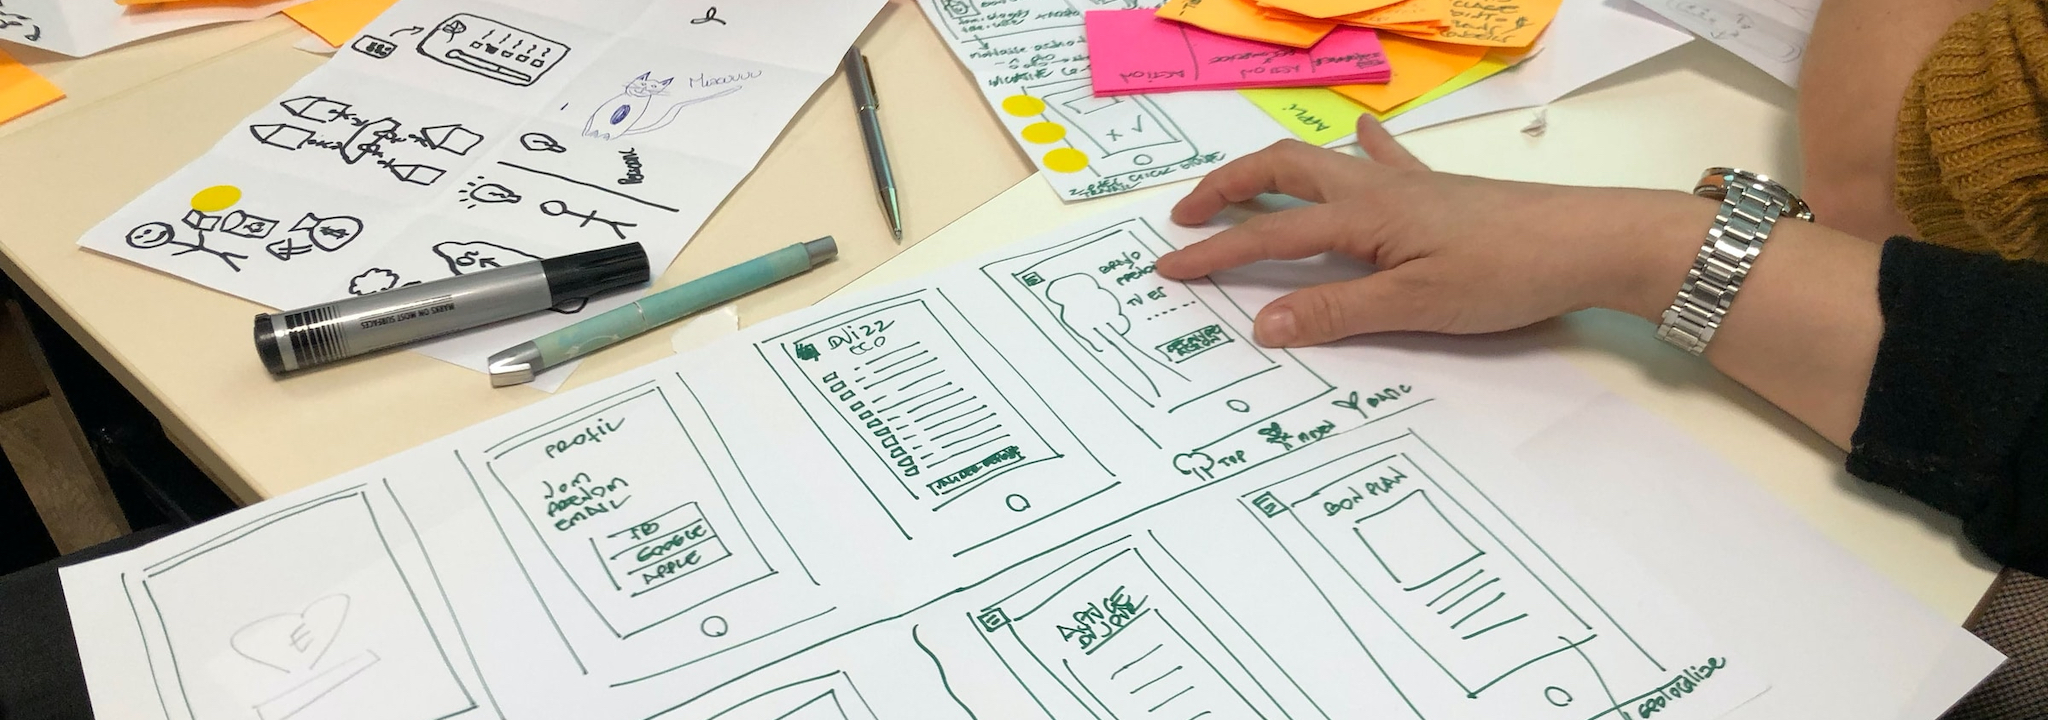 close up of sketches of website wireframes